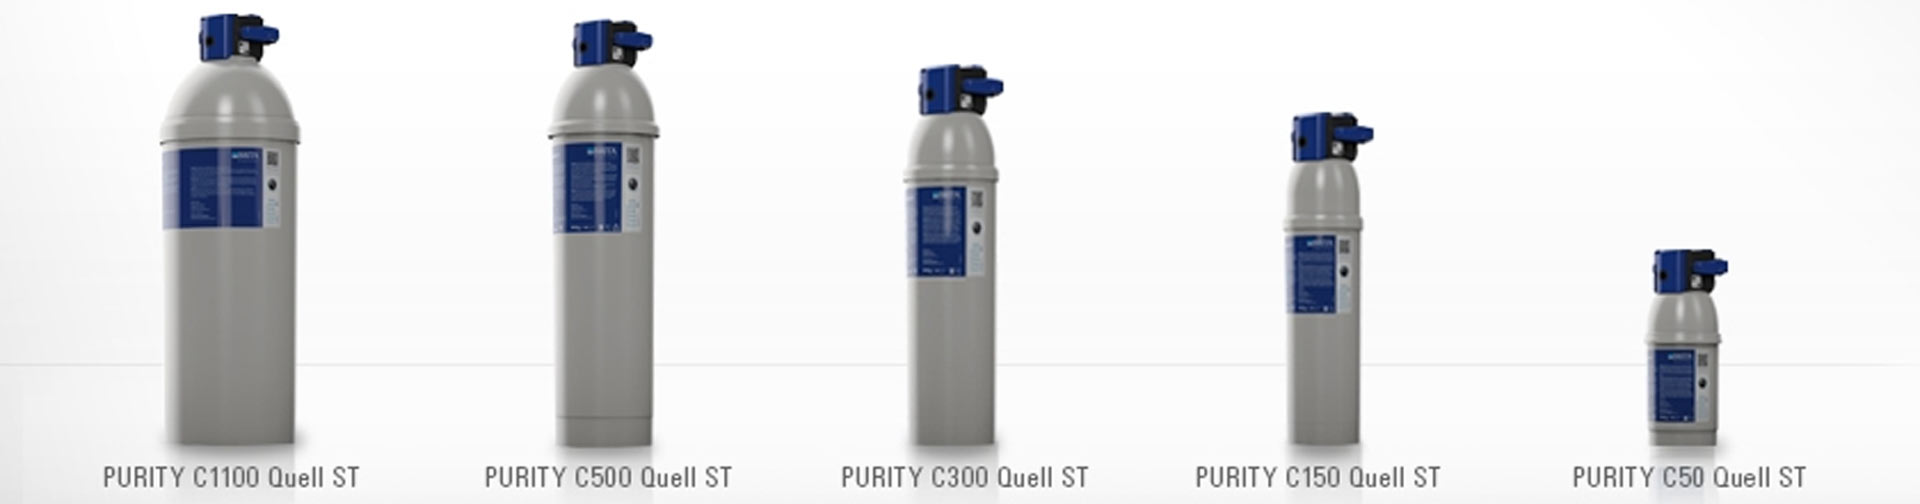 PURITY C Quell ST